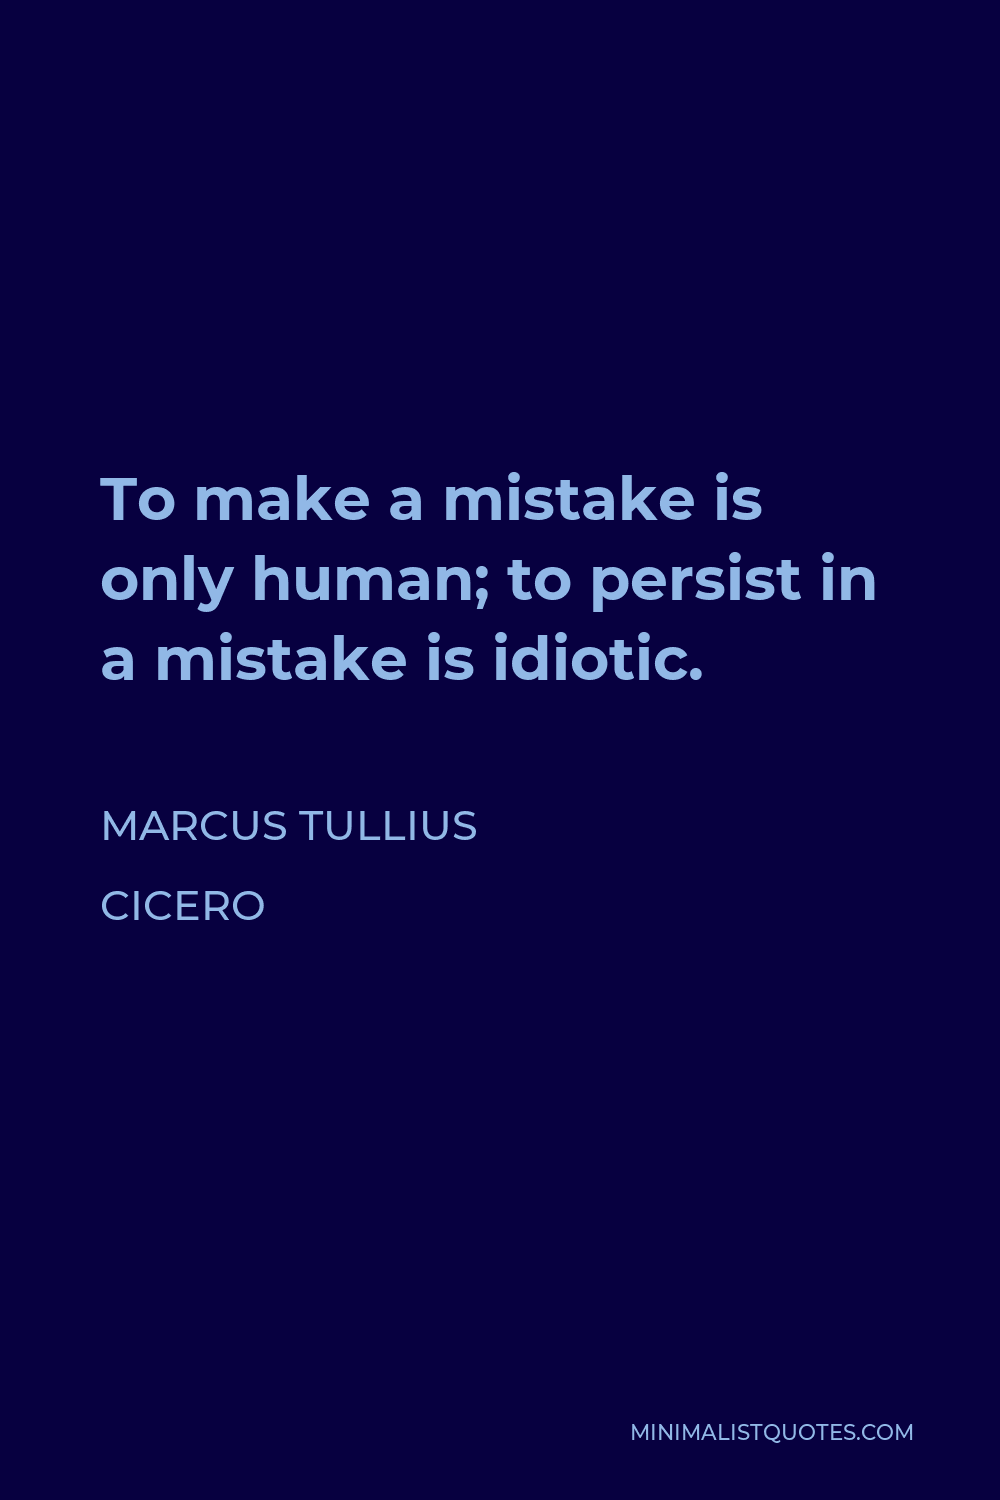 Marcus Tullius Cicero Quote: To make a mistake is only human; to ...